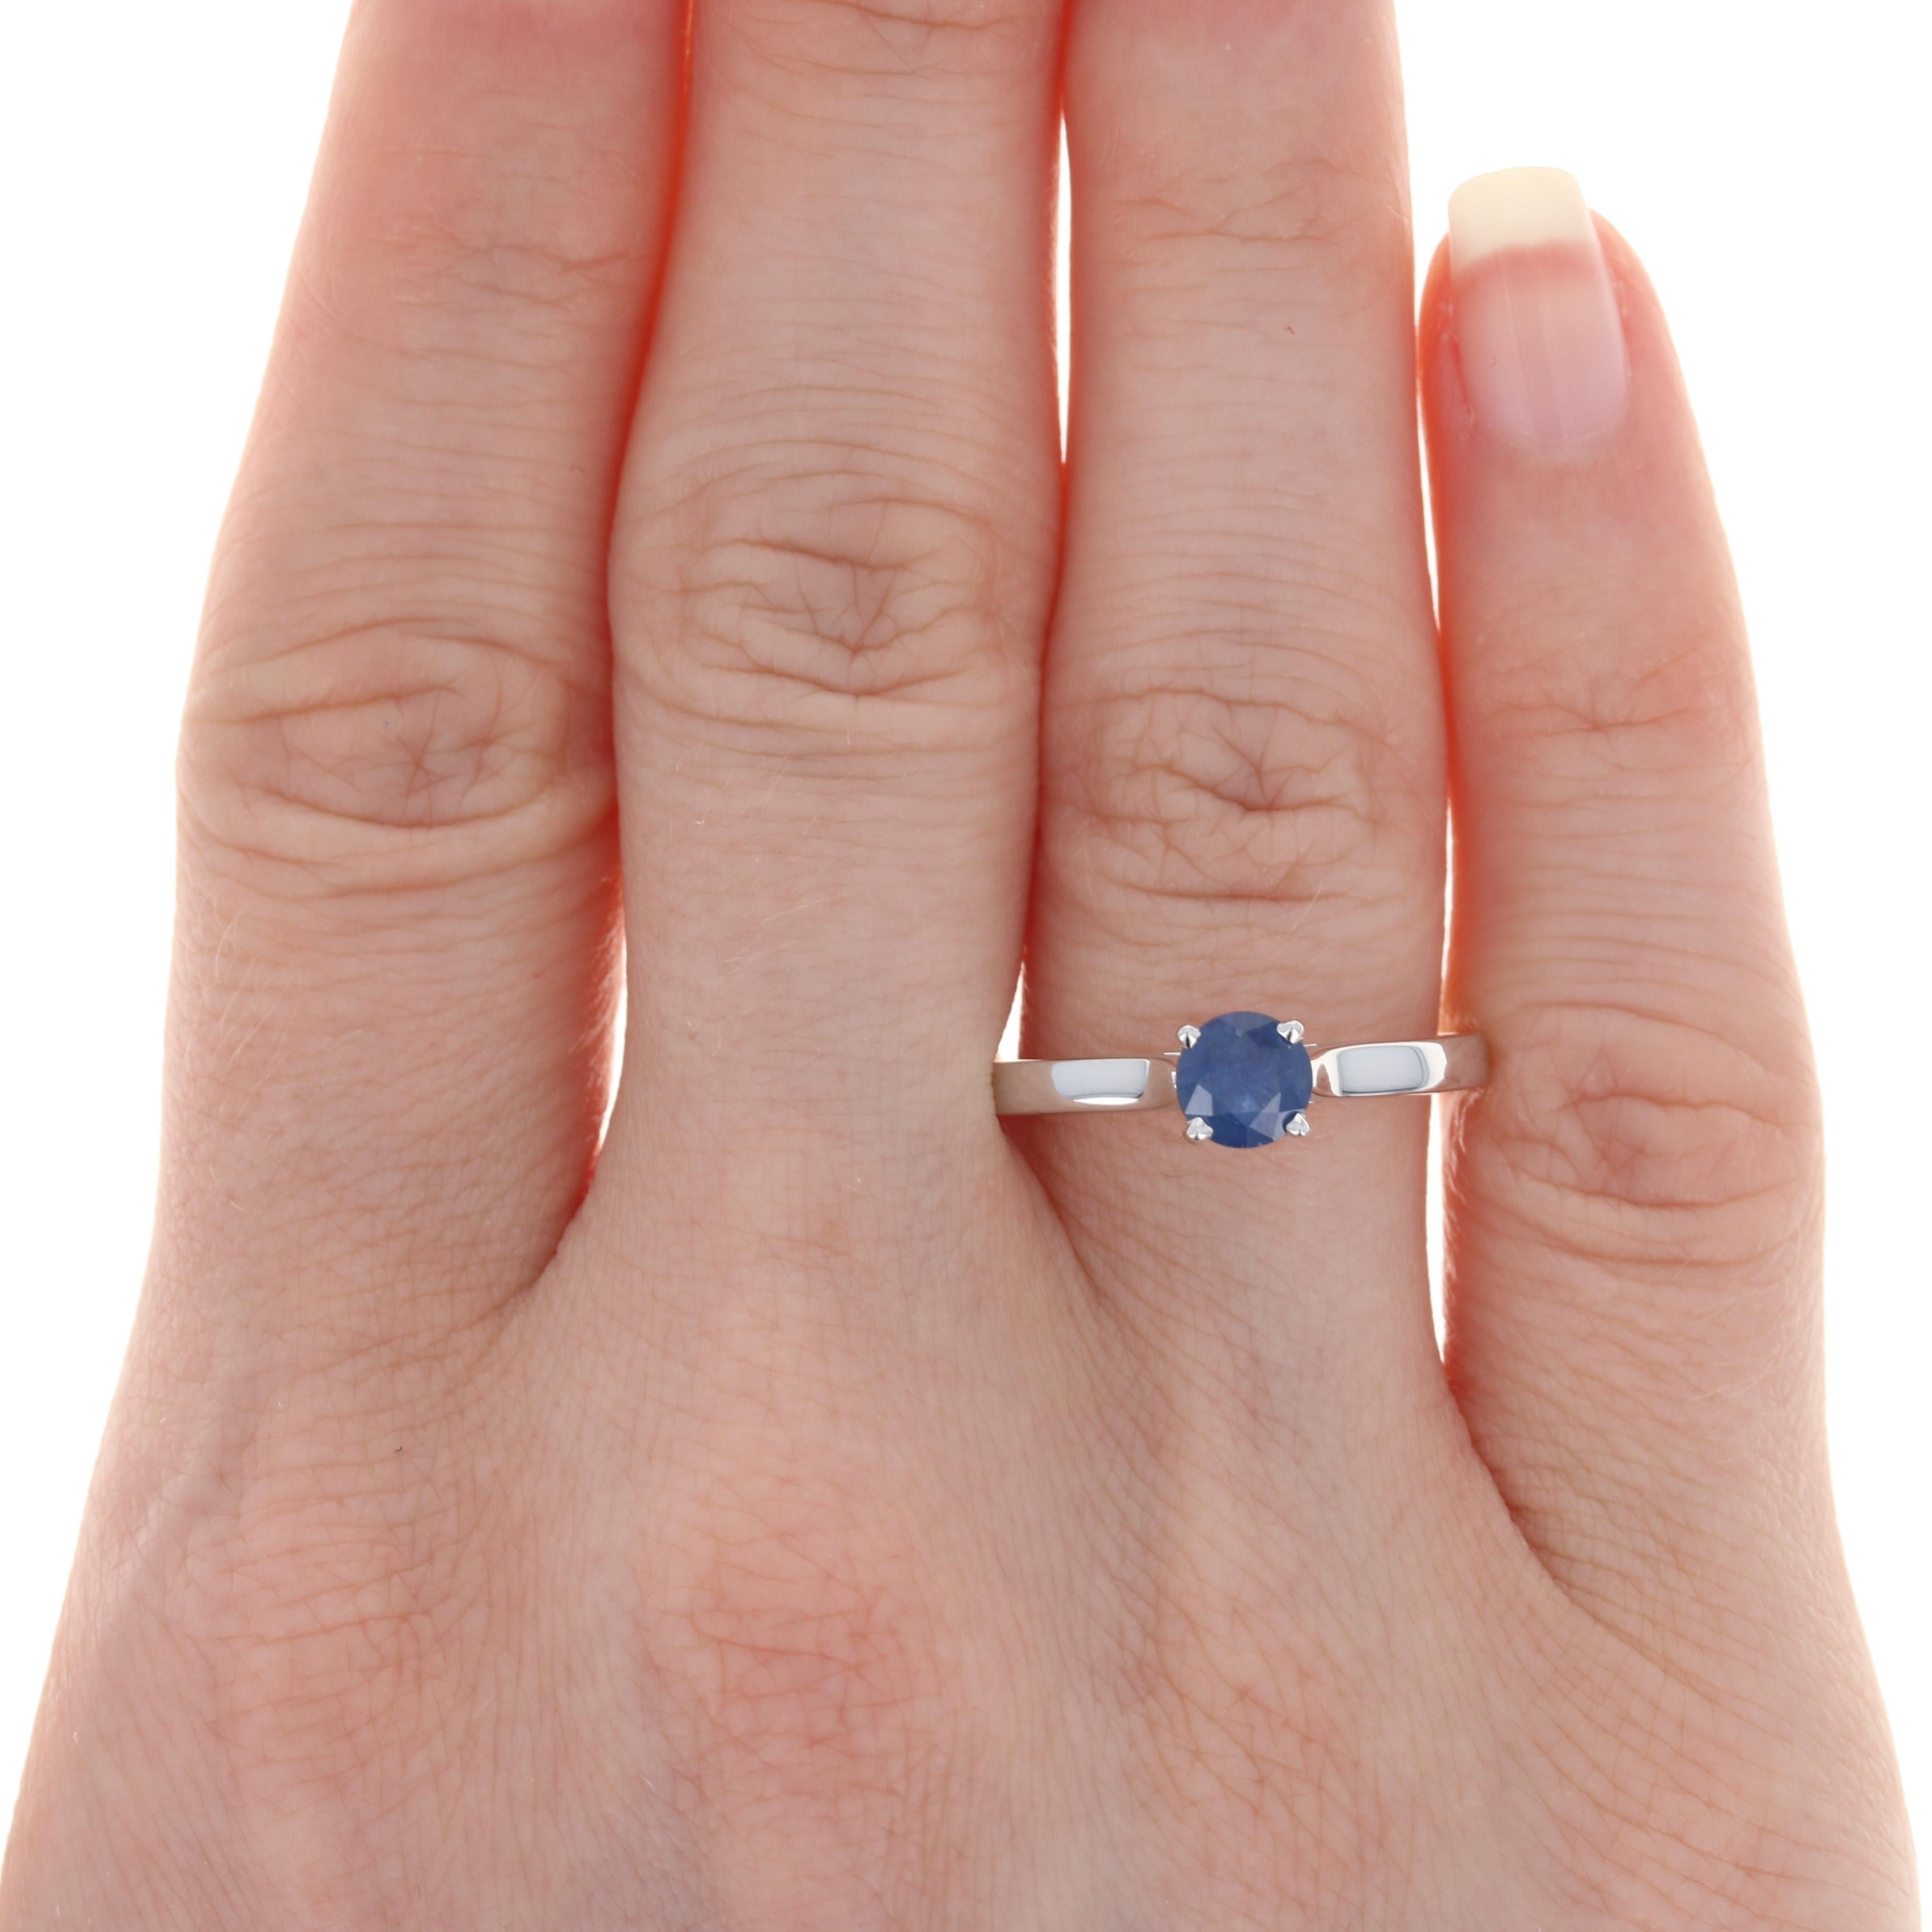 Dazzle and delight your sweetheart when you propose to her with this gorgeous NEW engagement ring! Featuring a cathedral-style mount, this 14k white gold piece showcases a heavenly blue sapphire solitaire that is held by four prongs which allow